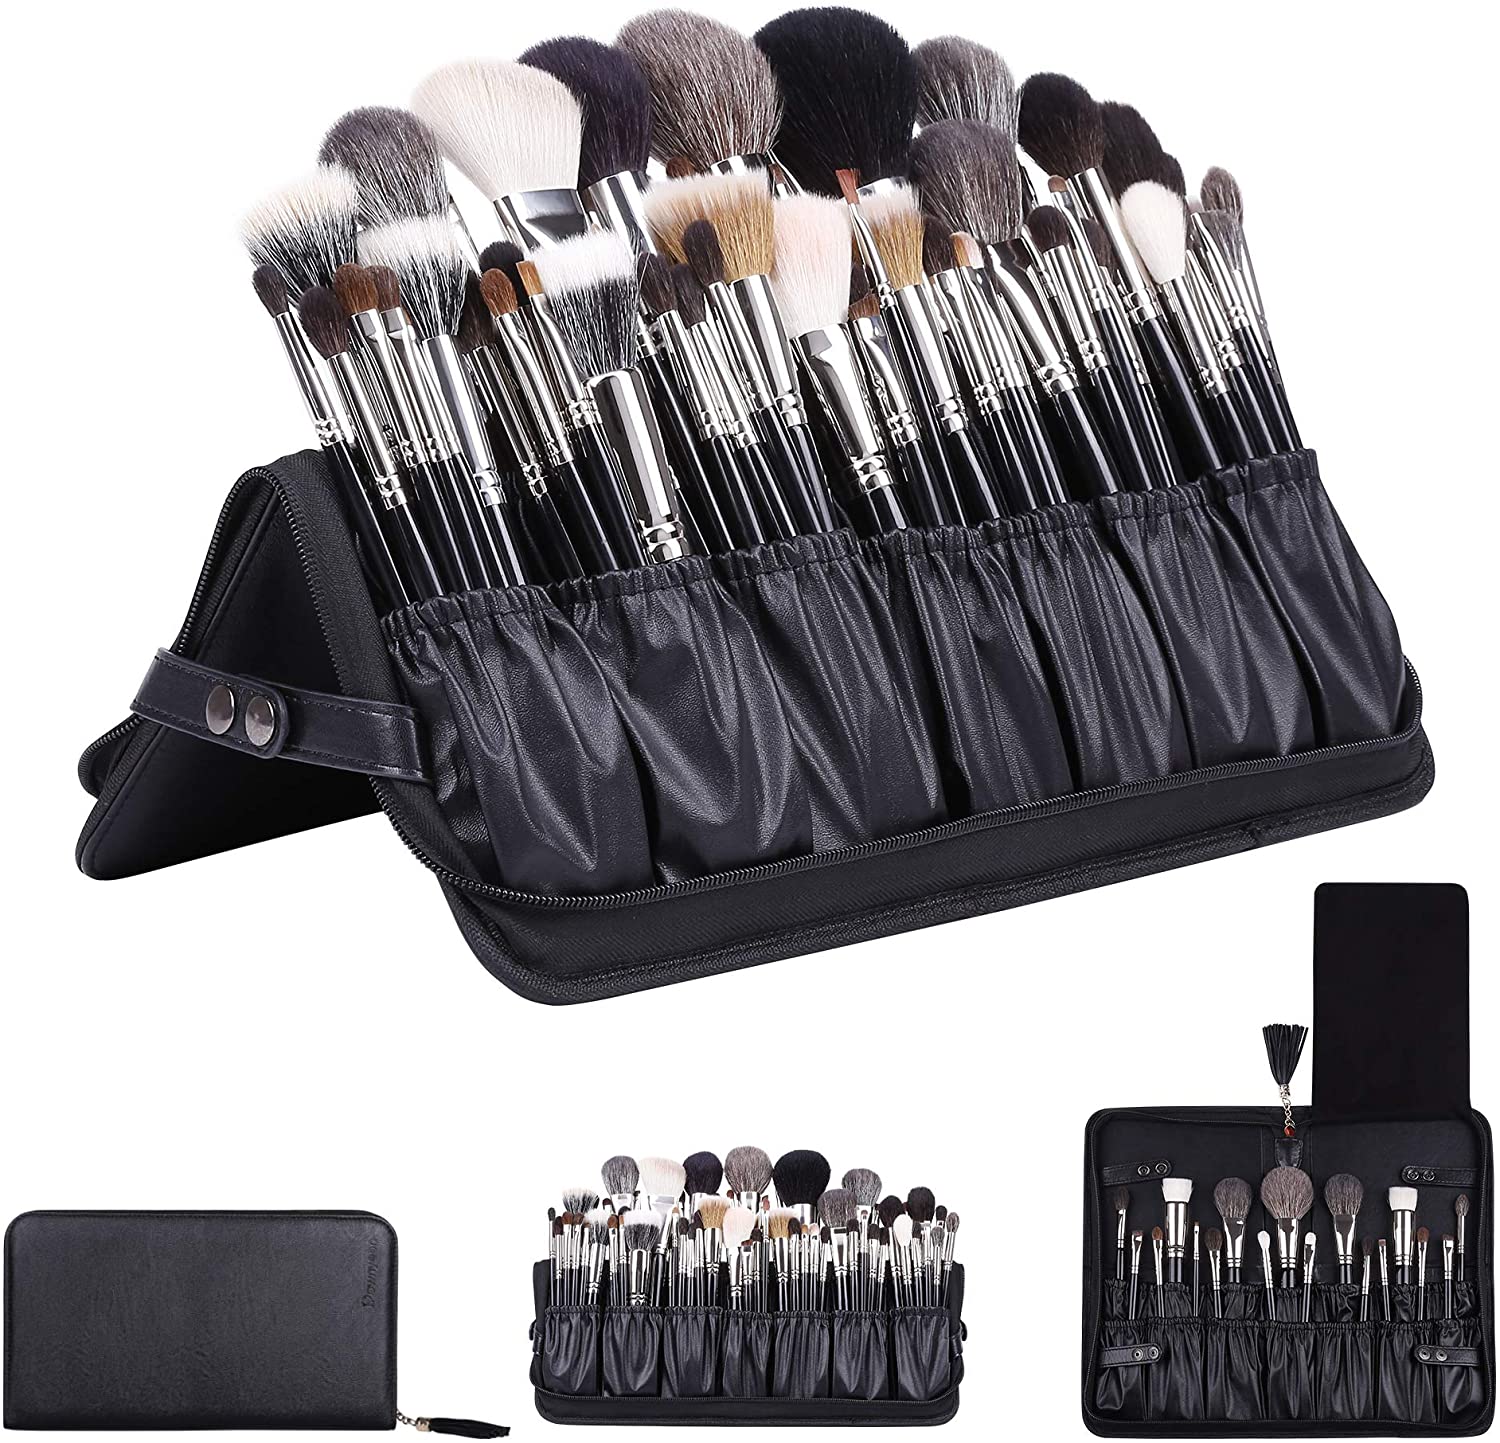 makeup bag with brush compartment